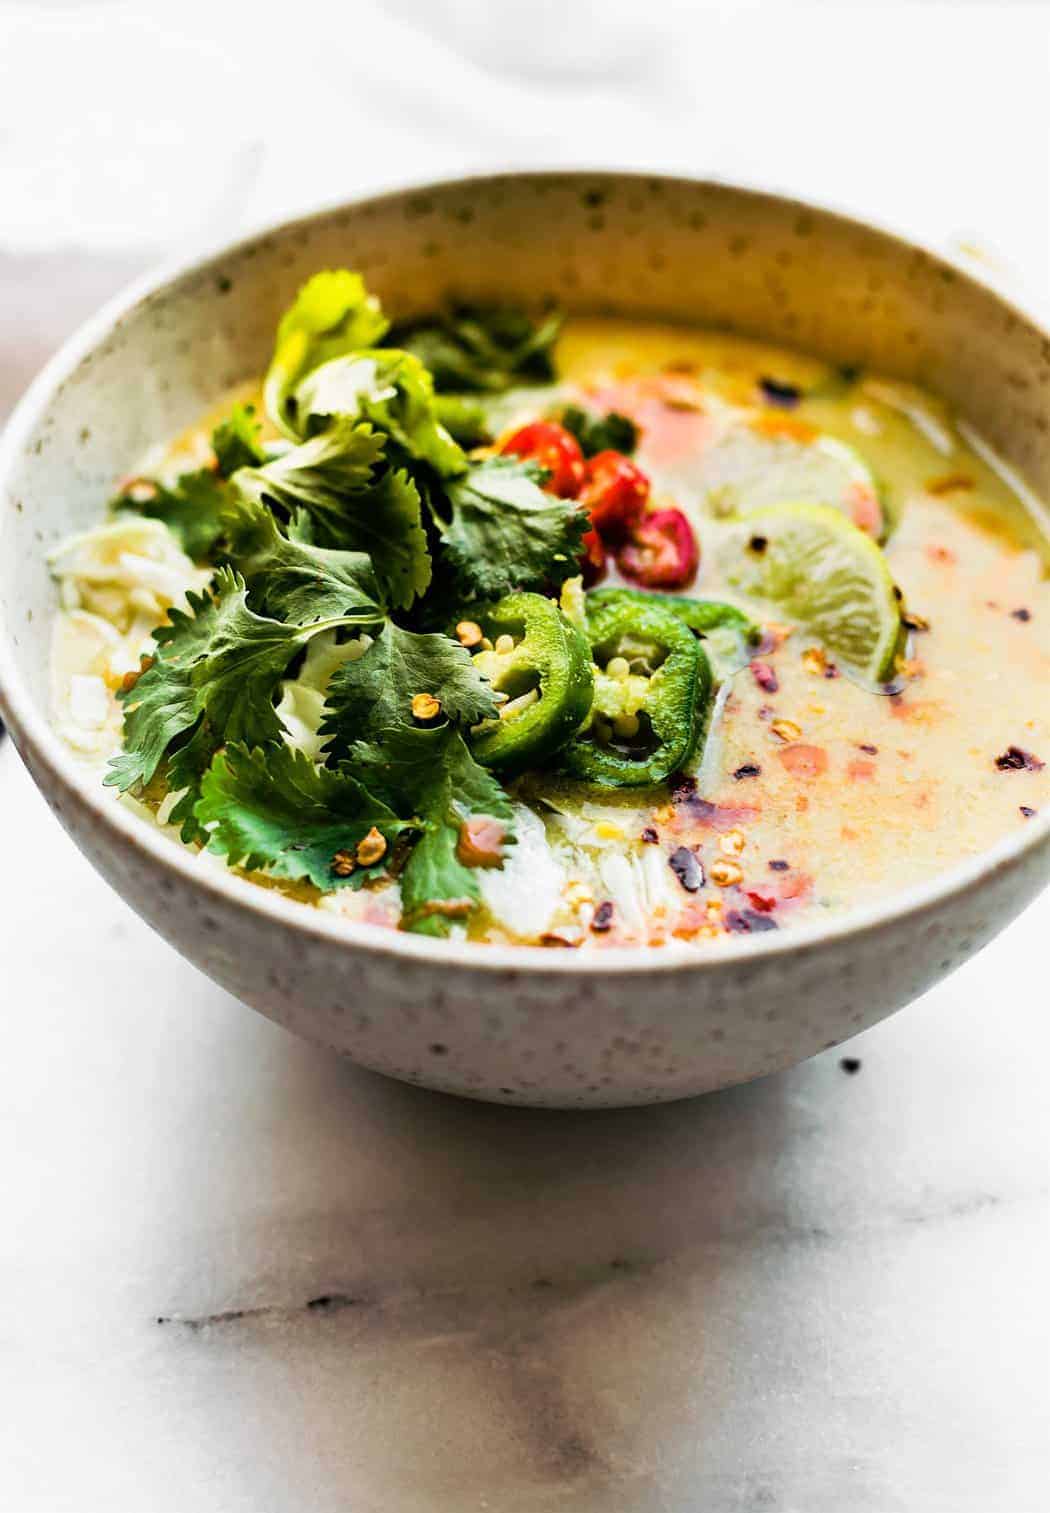 Thai Coconut Cabbage Soup from Cotter Crunch | 30 Whole30 Soups, Stews & Chilis | healthy soup recipes | whole30 meal ideas | whole30 recipes | whole30 chili recipes || The Real Food Dietitians #whole30soups #whole30recipe #whole30meals